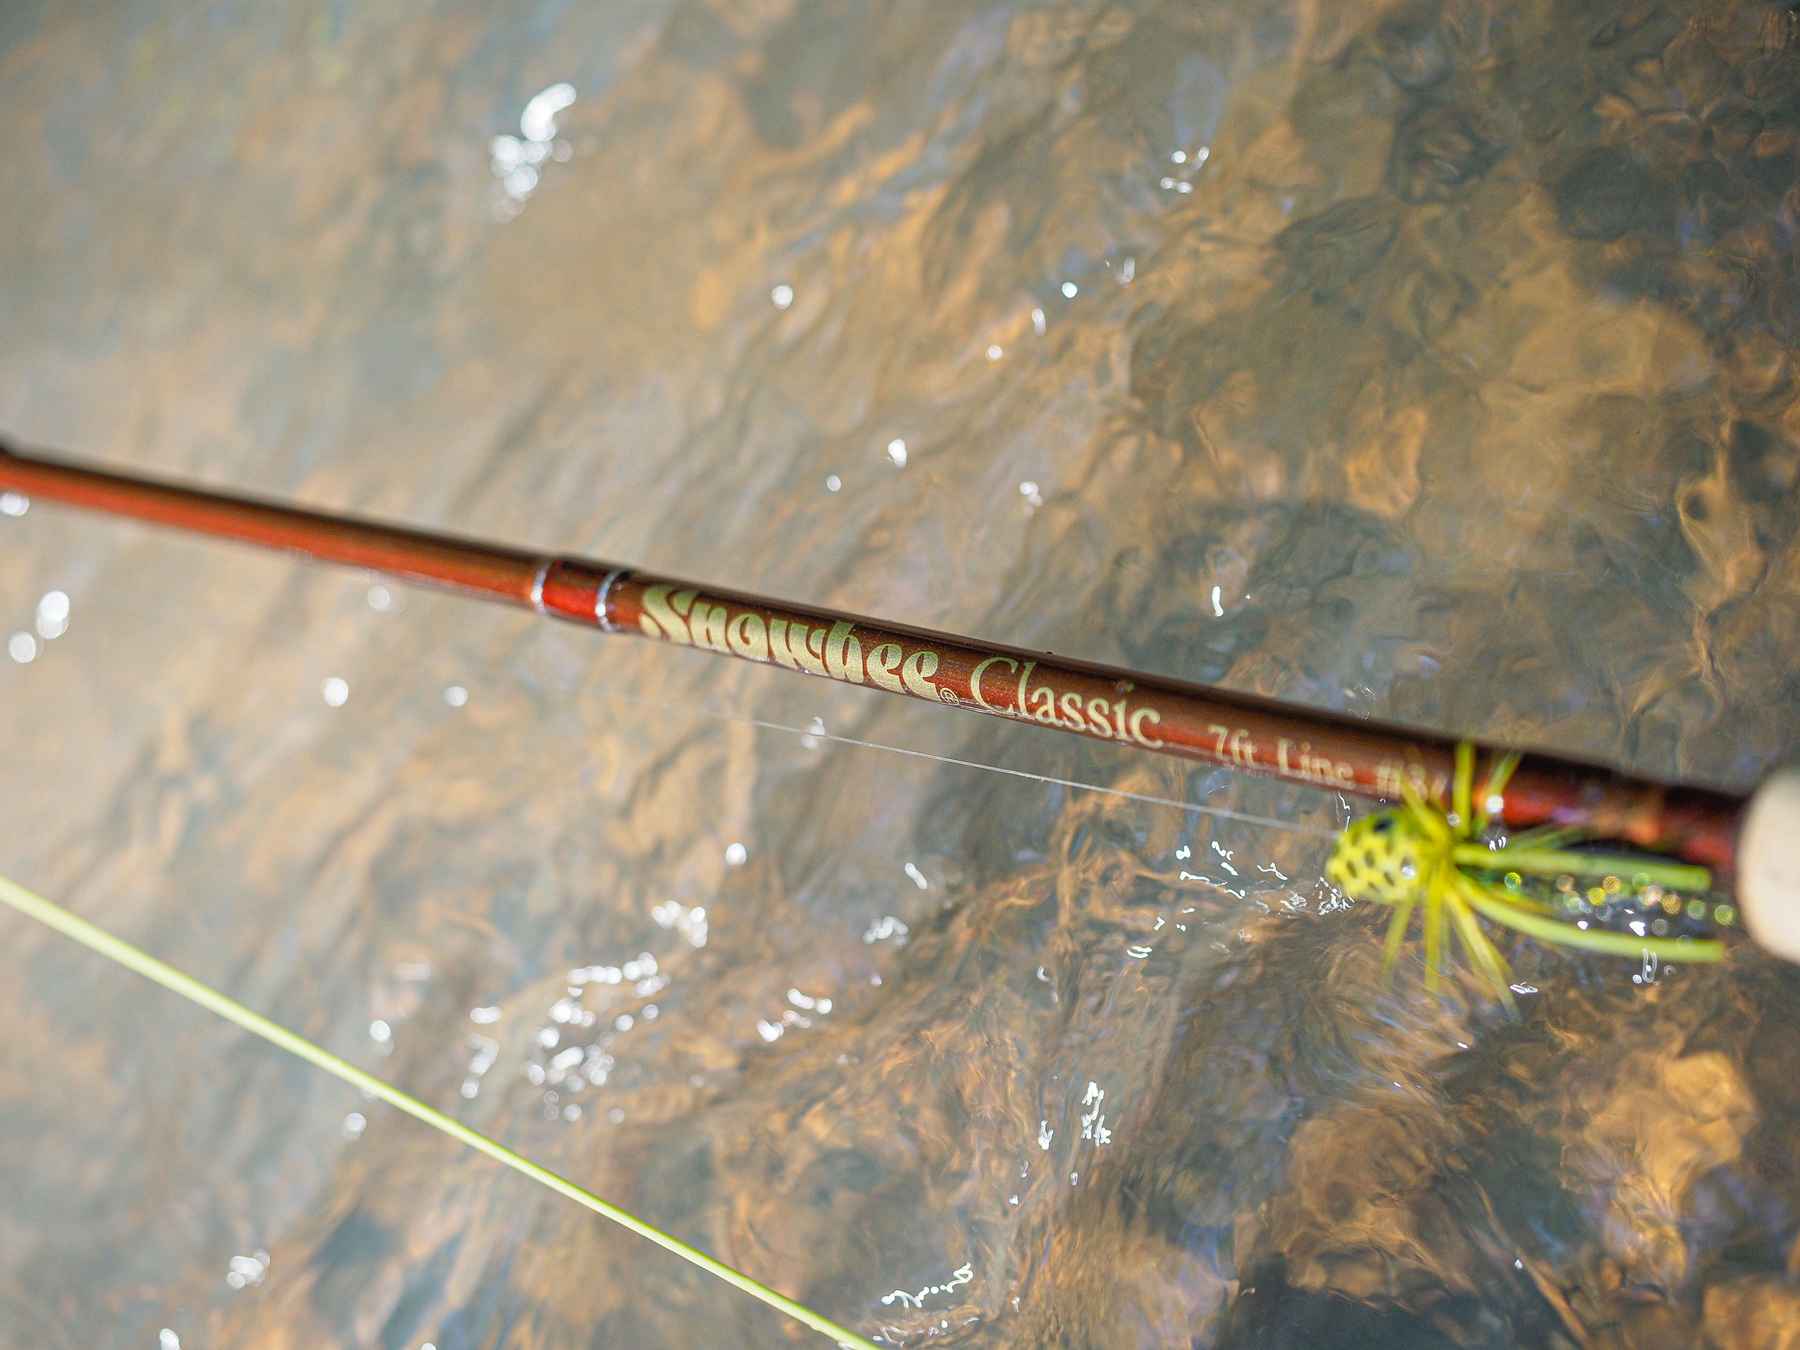 The Best Fly Rods for Small Water